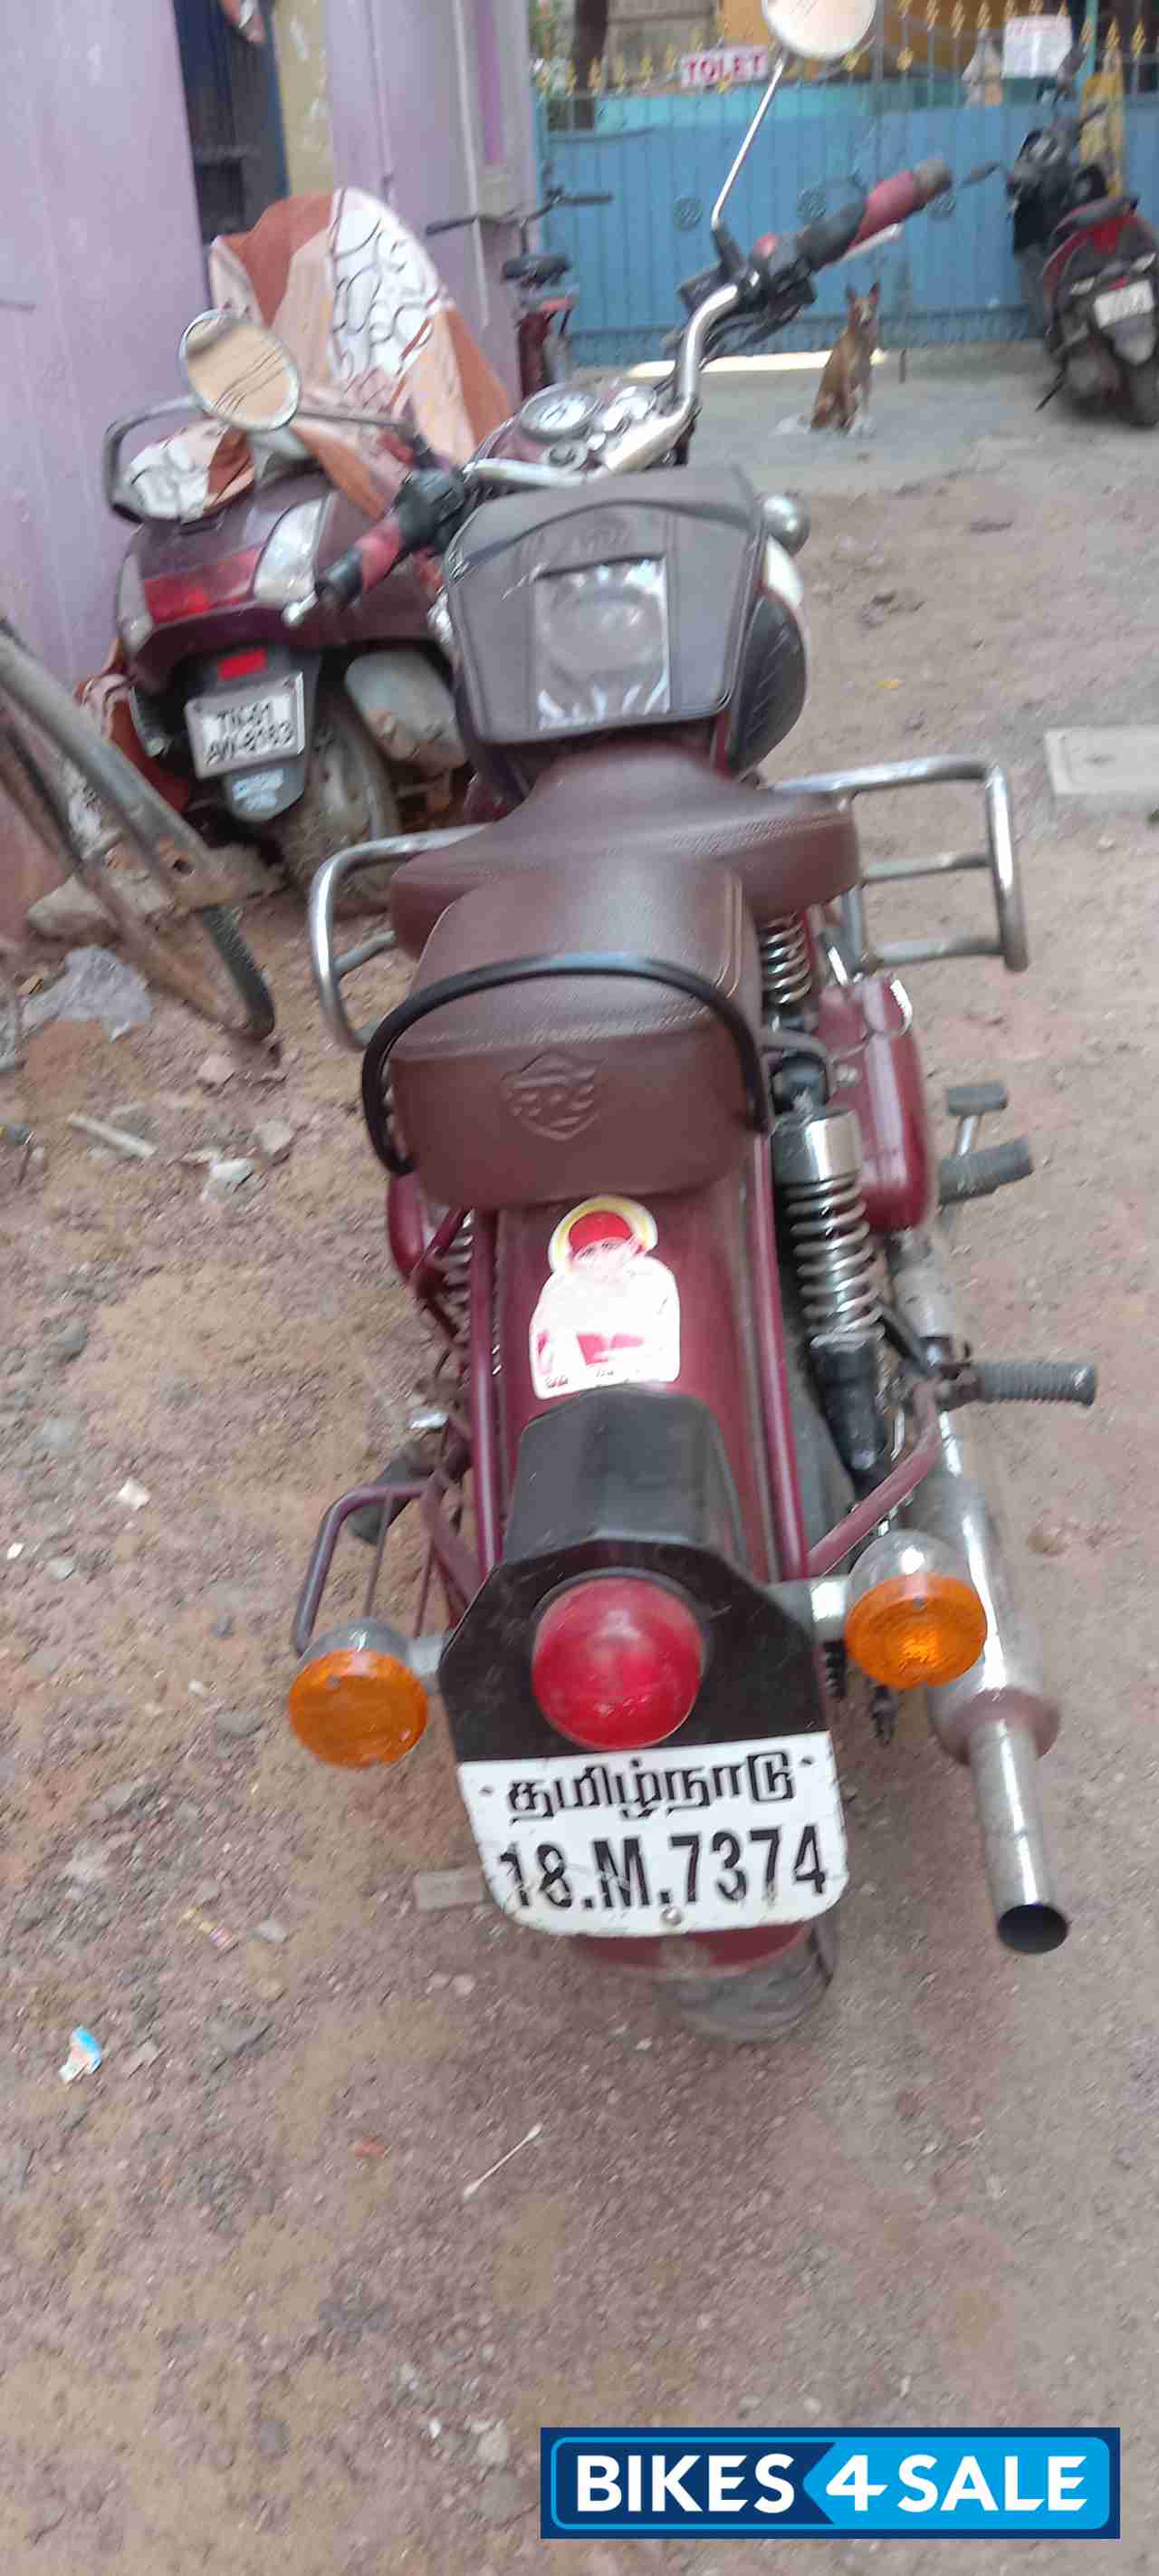 Meroon Royal Enfield Classic 350